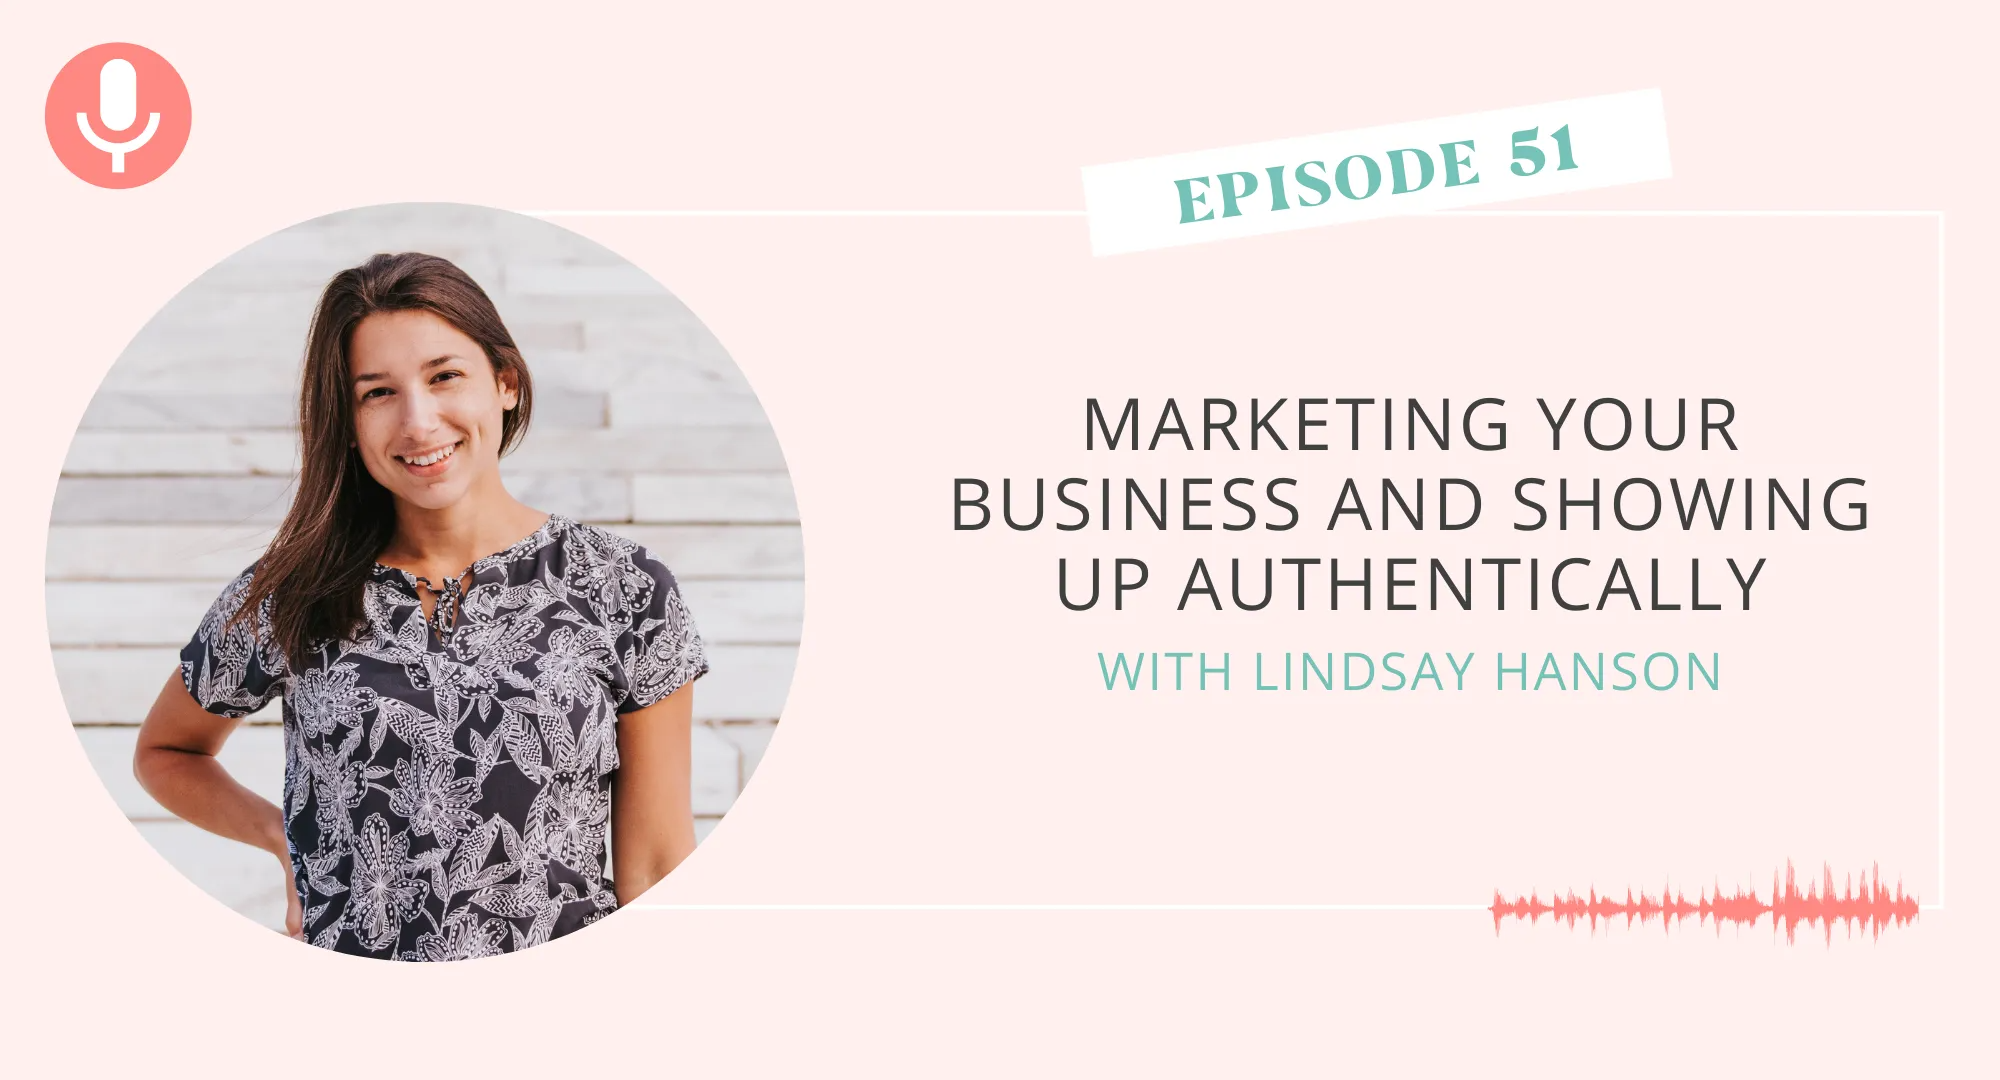 Marketing Your Business and Showing Up Authentically with Lindsay Hanson